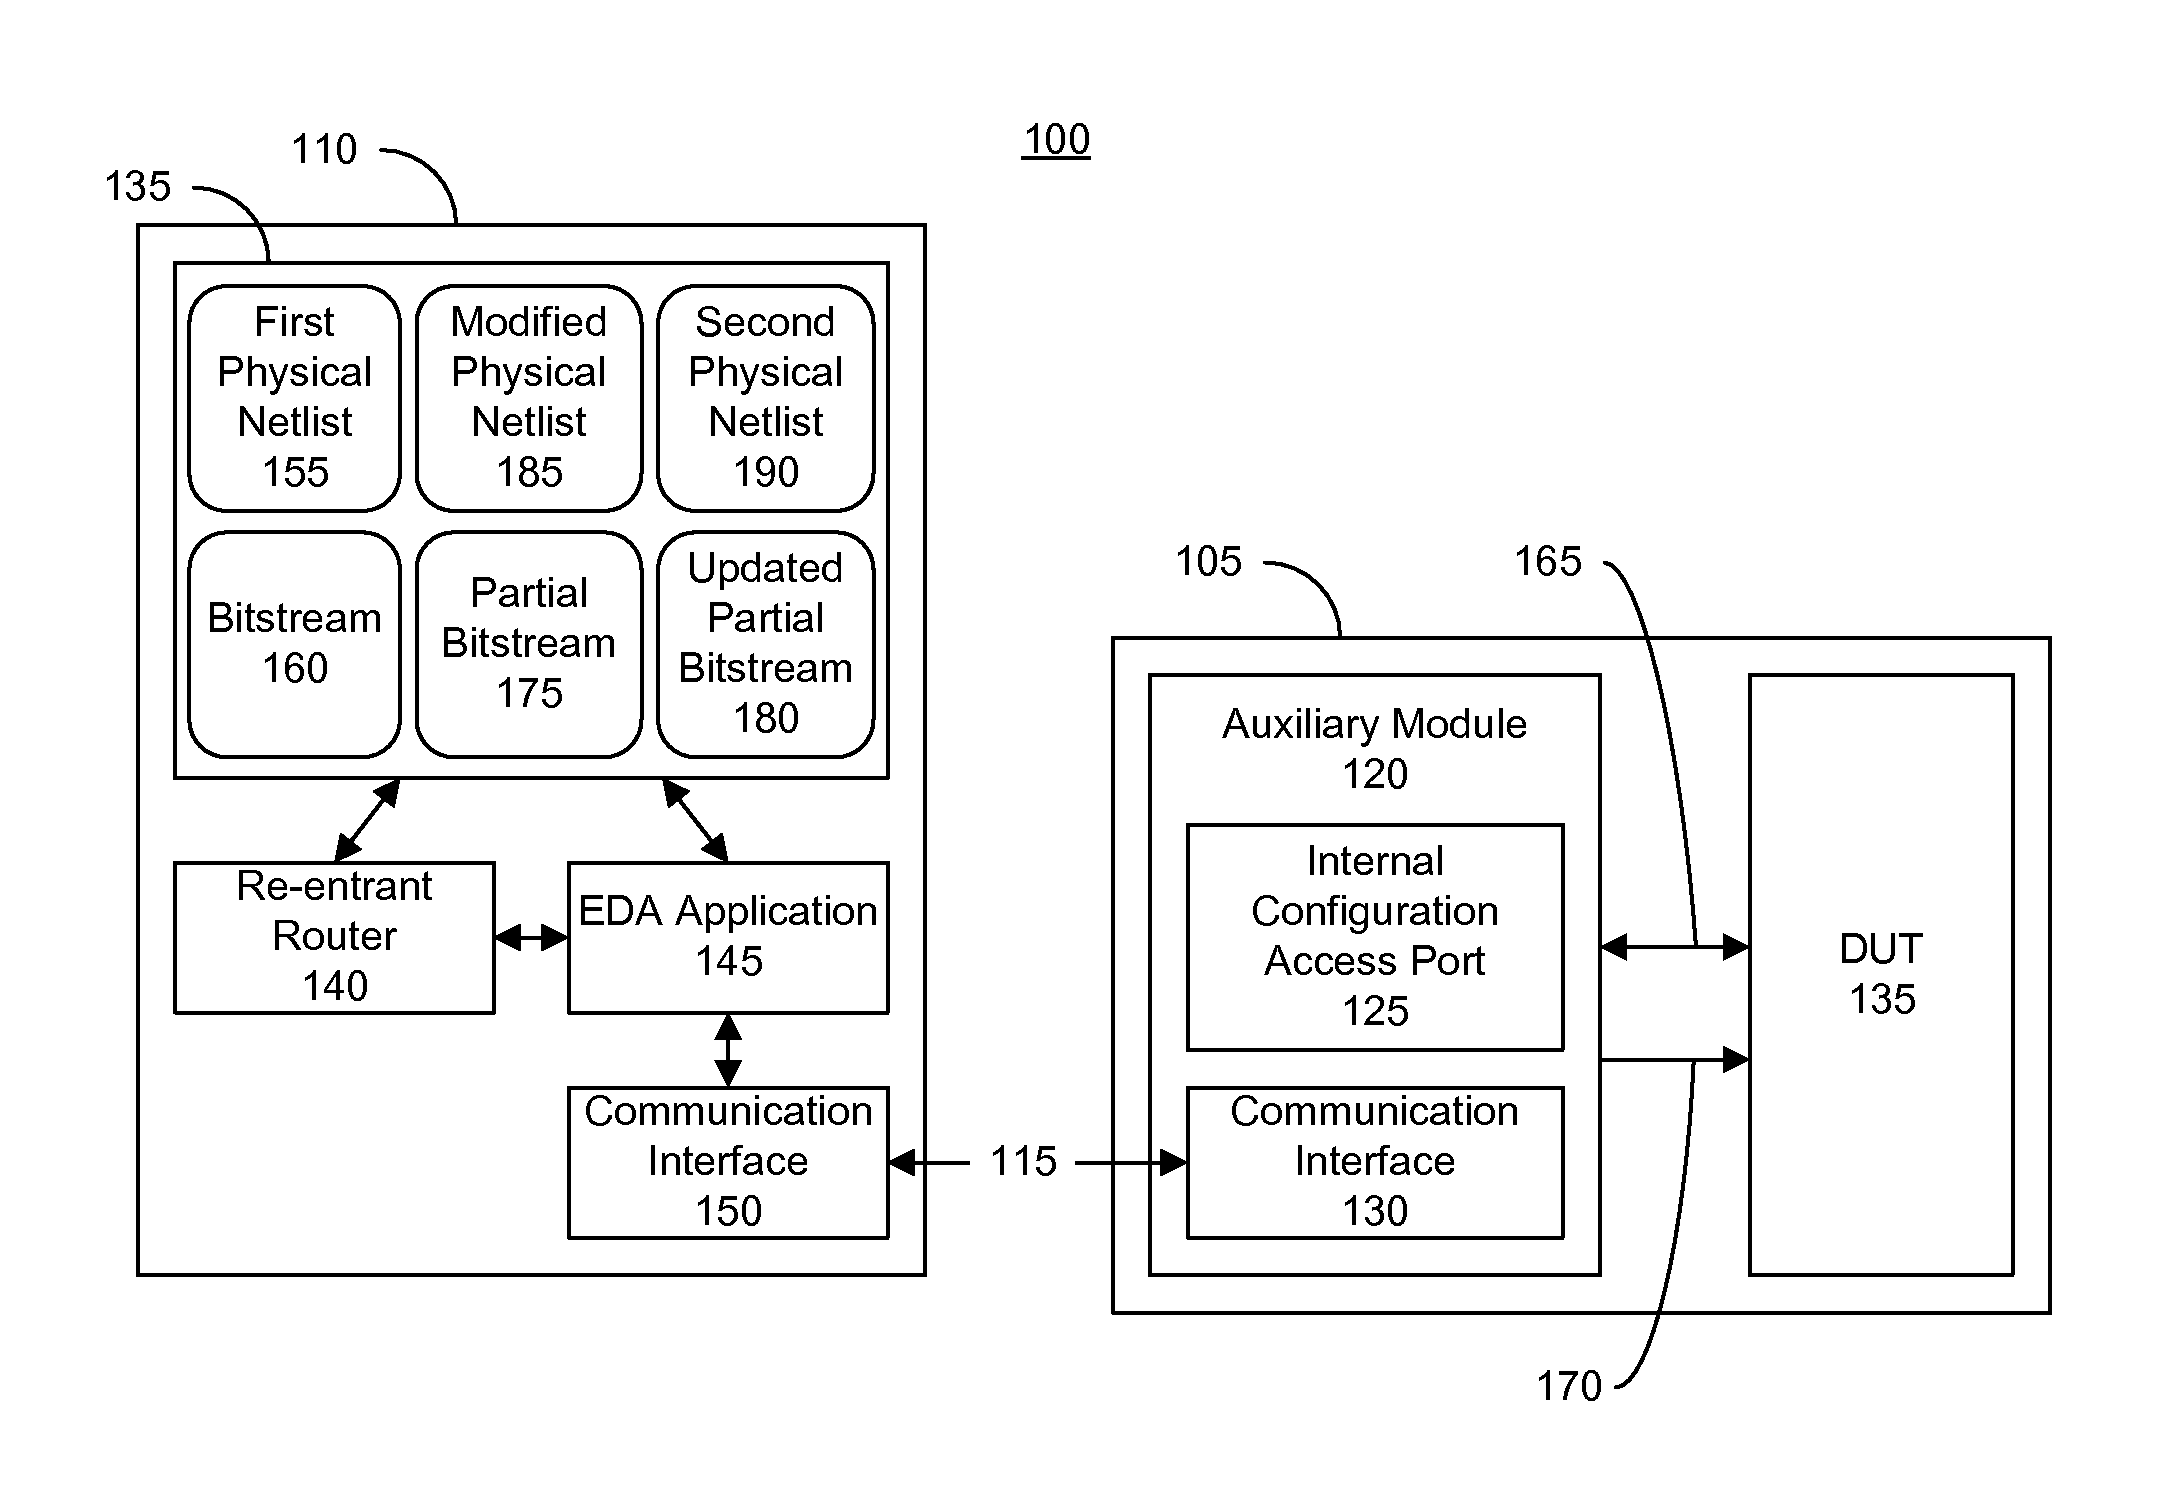 Rapid rerouting based runtime reconfigurable signal probing